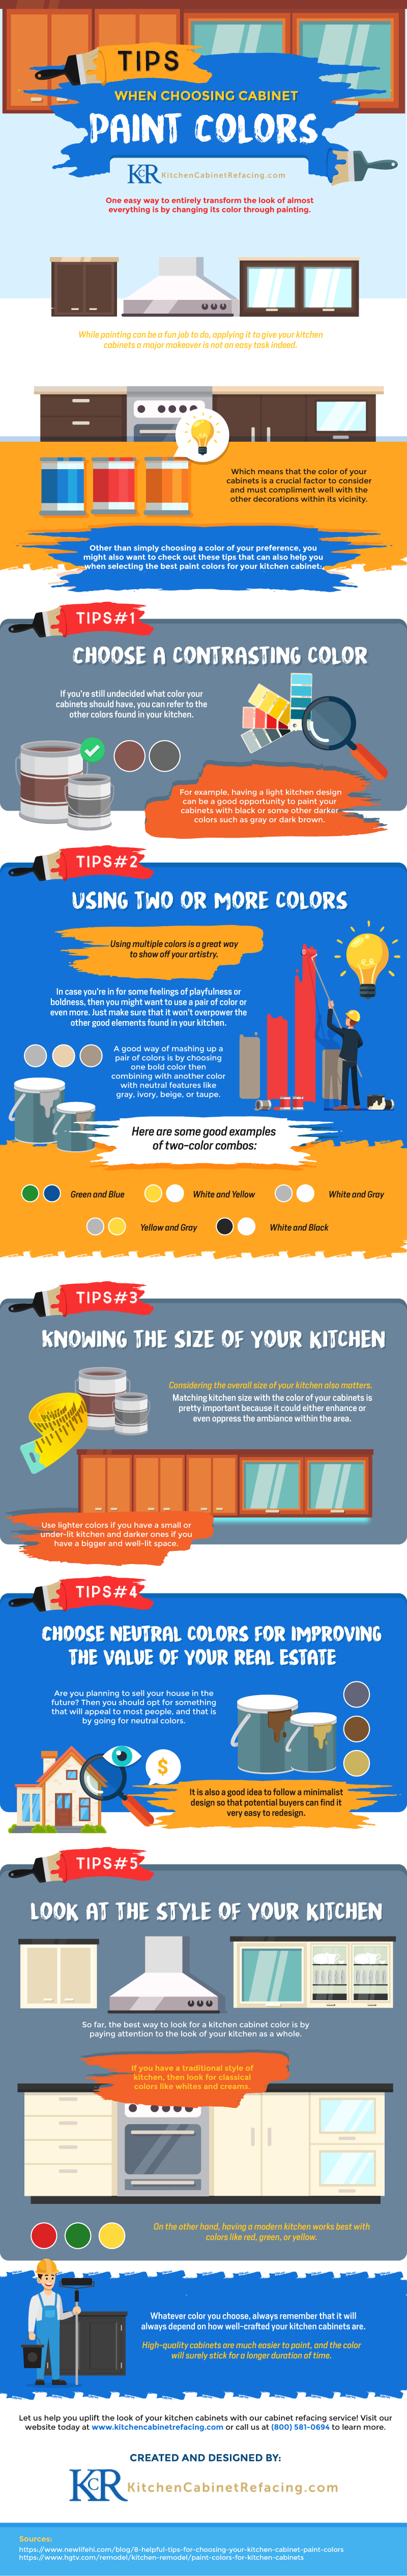 Tips When Choosing Cabinet Paint Colors #infographic